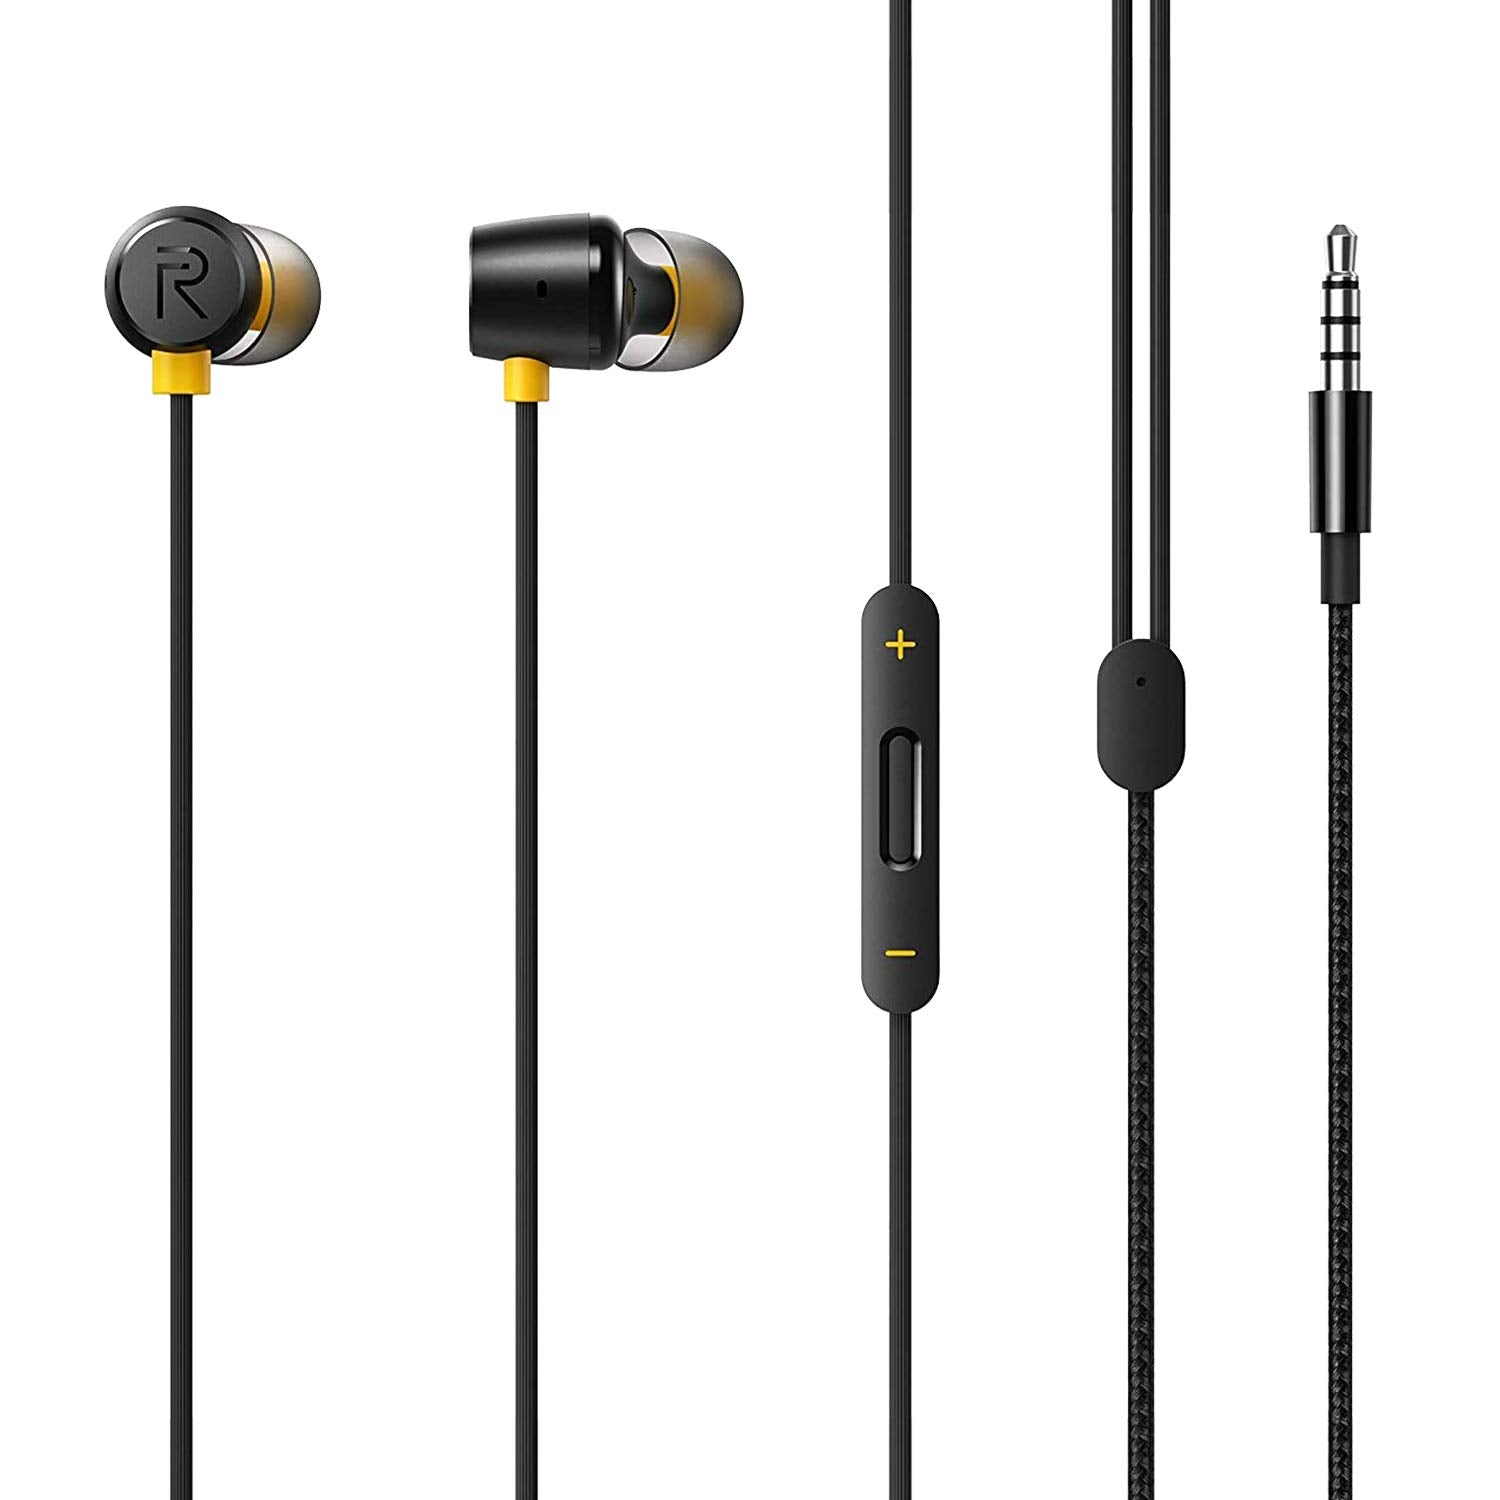 realme Buds 2 Wired in Ear Earphones with Mic (Black) -  In-Ear in Sri Lanka from Arcade Online Shopping - Just Rs. 4790!